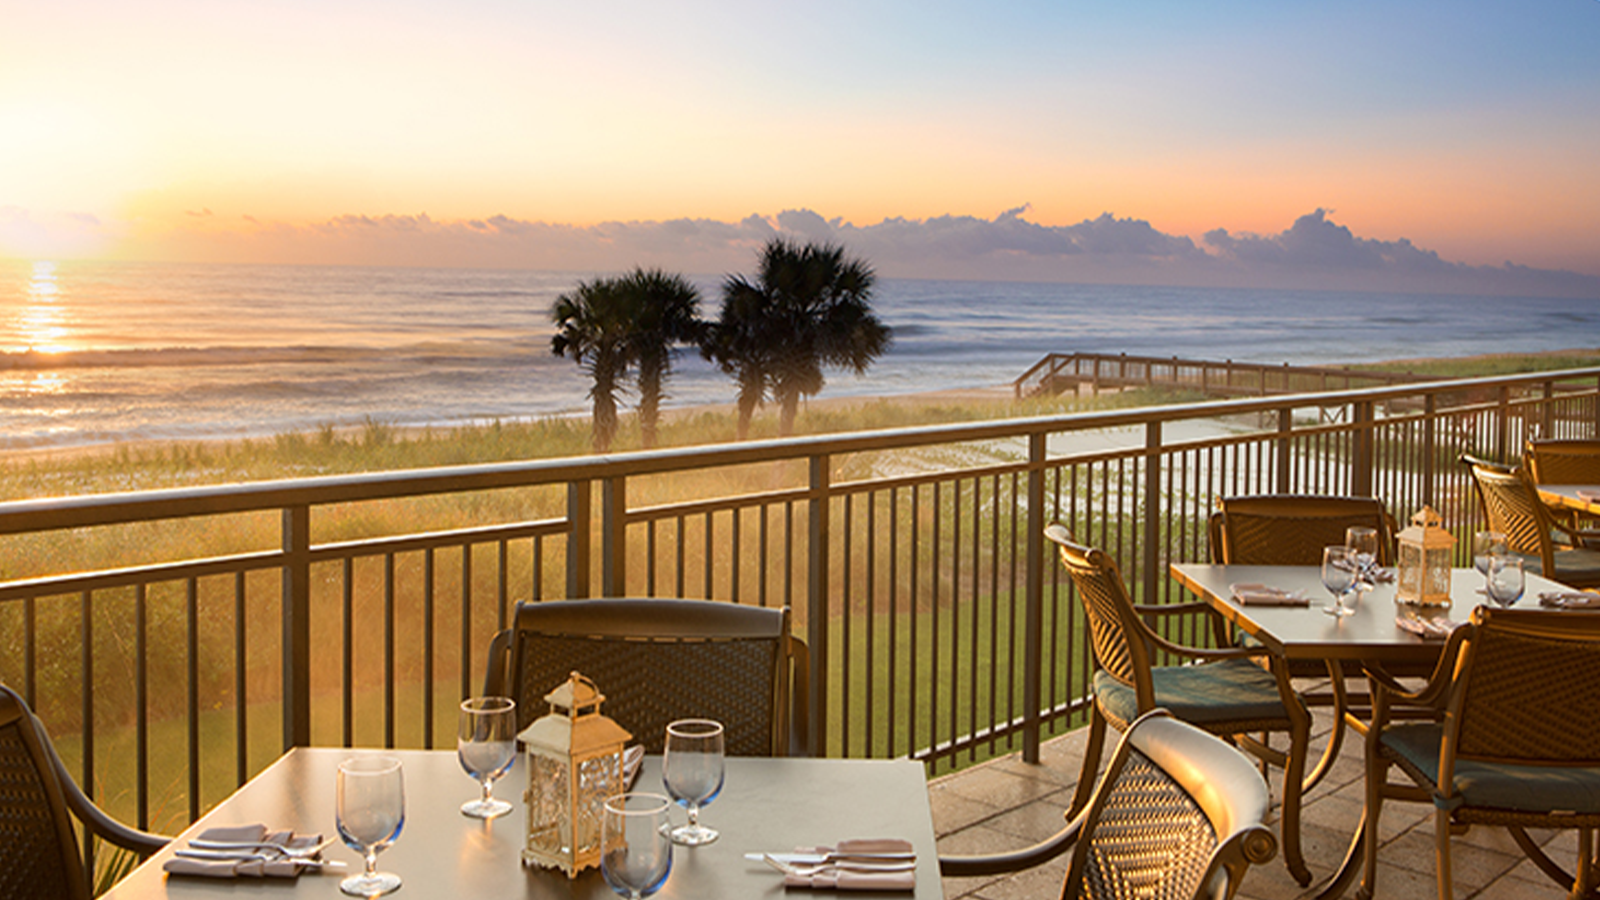 The view from The Atlantic Grill (Photo courtesy of HammockBeach.com)